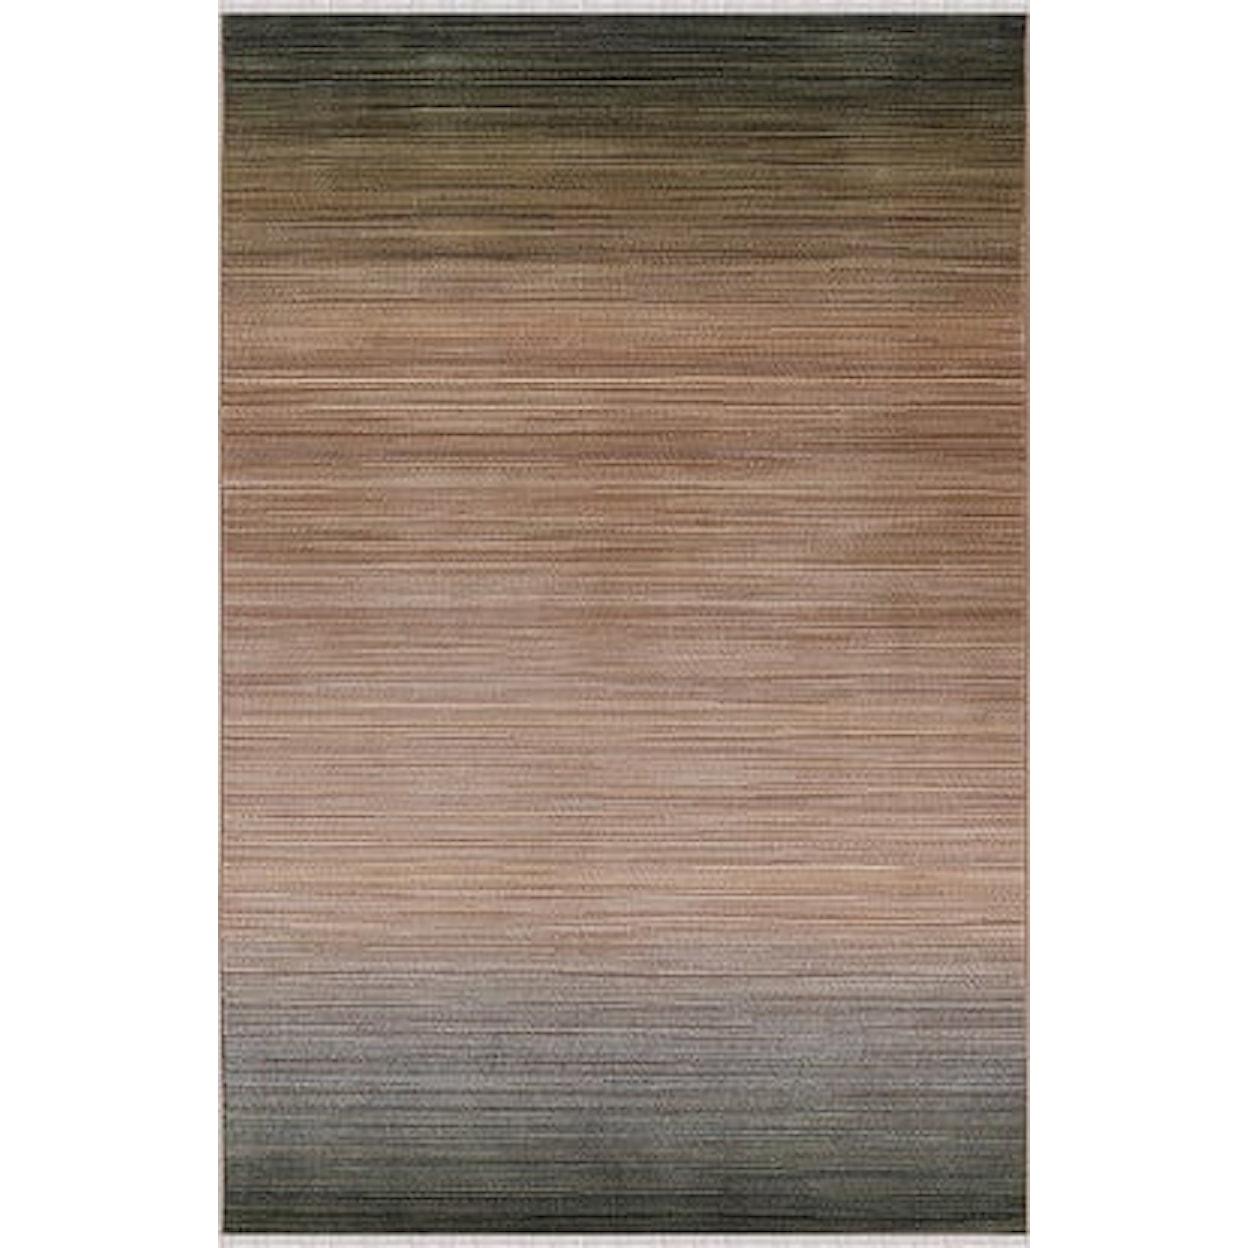 MDA Rugs Anna Collection ANNA 5X8 BLACK BROWN AREA RUG |